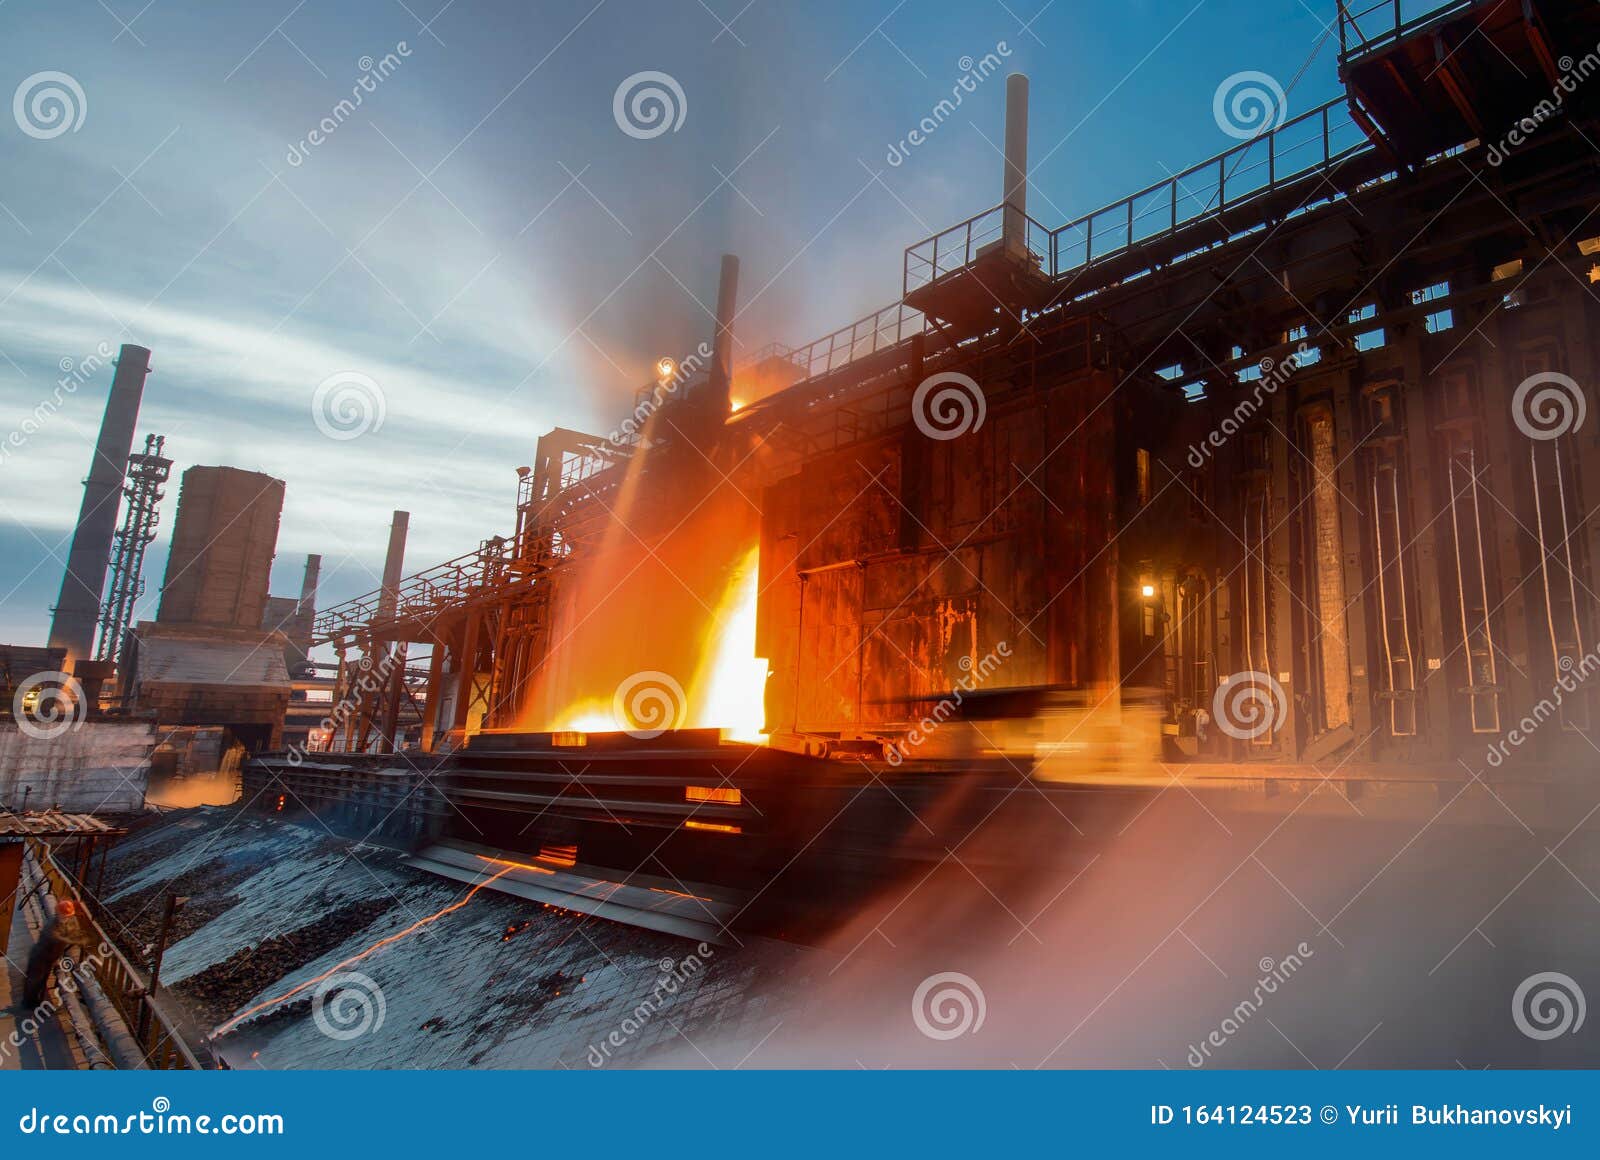 coke oven battery in the metallurgical industry